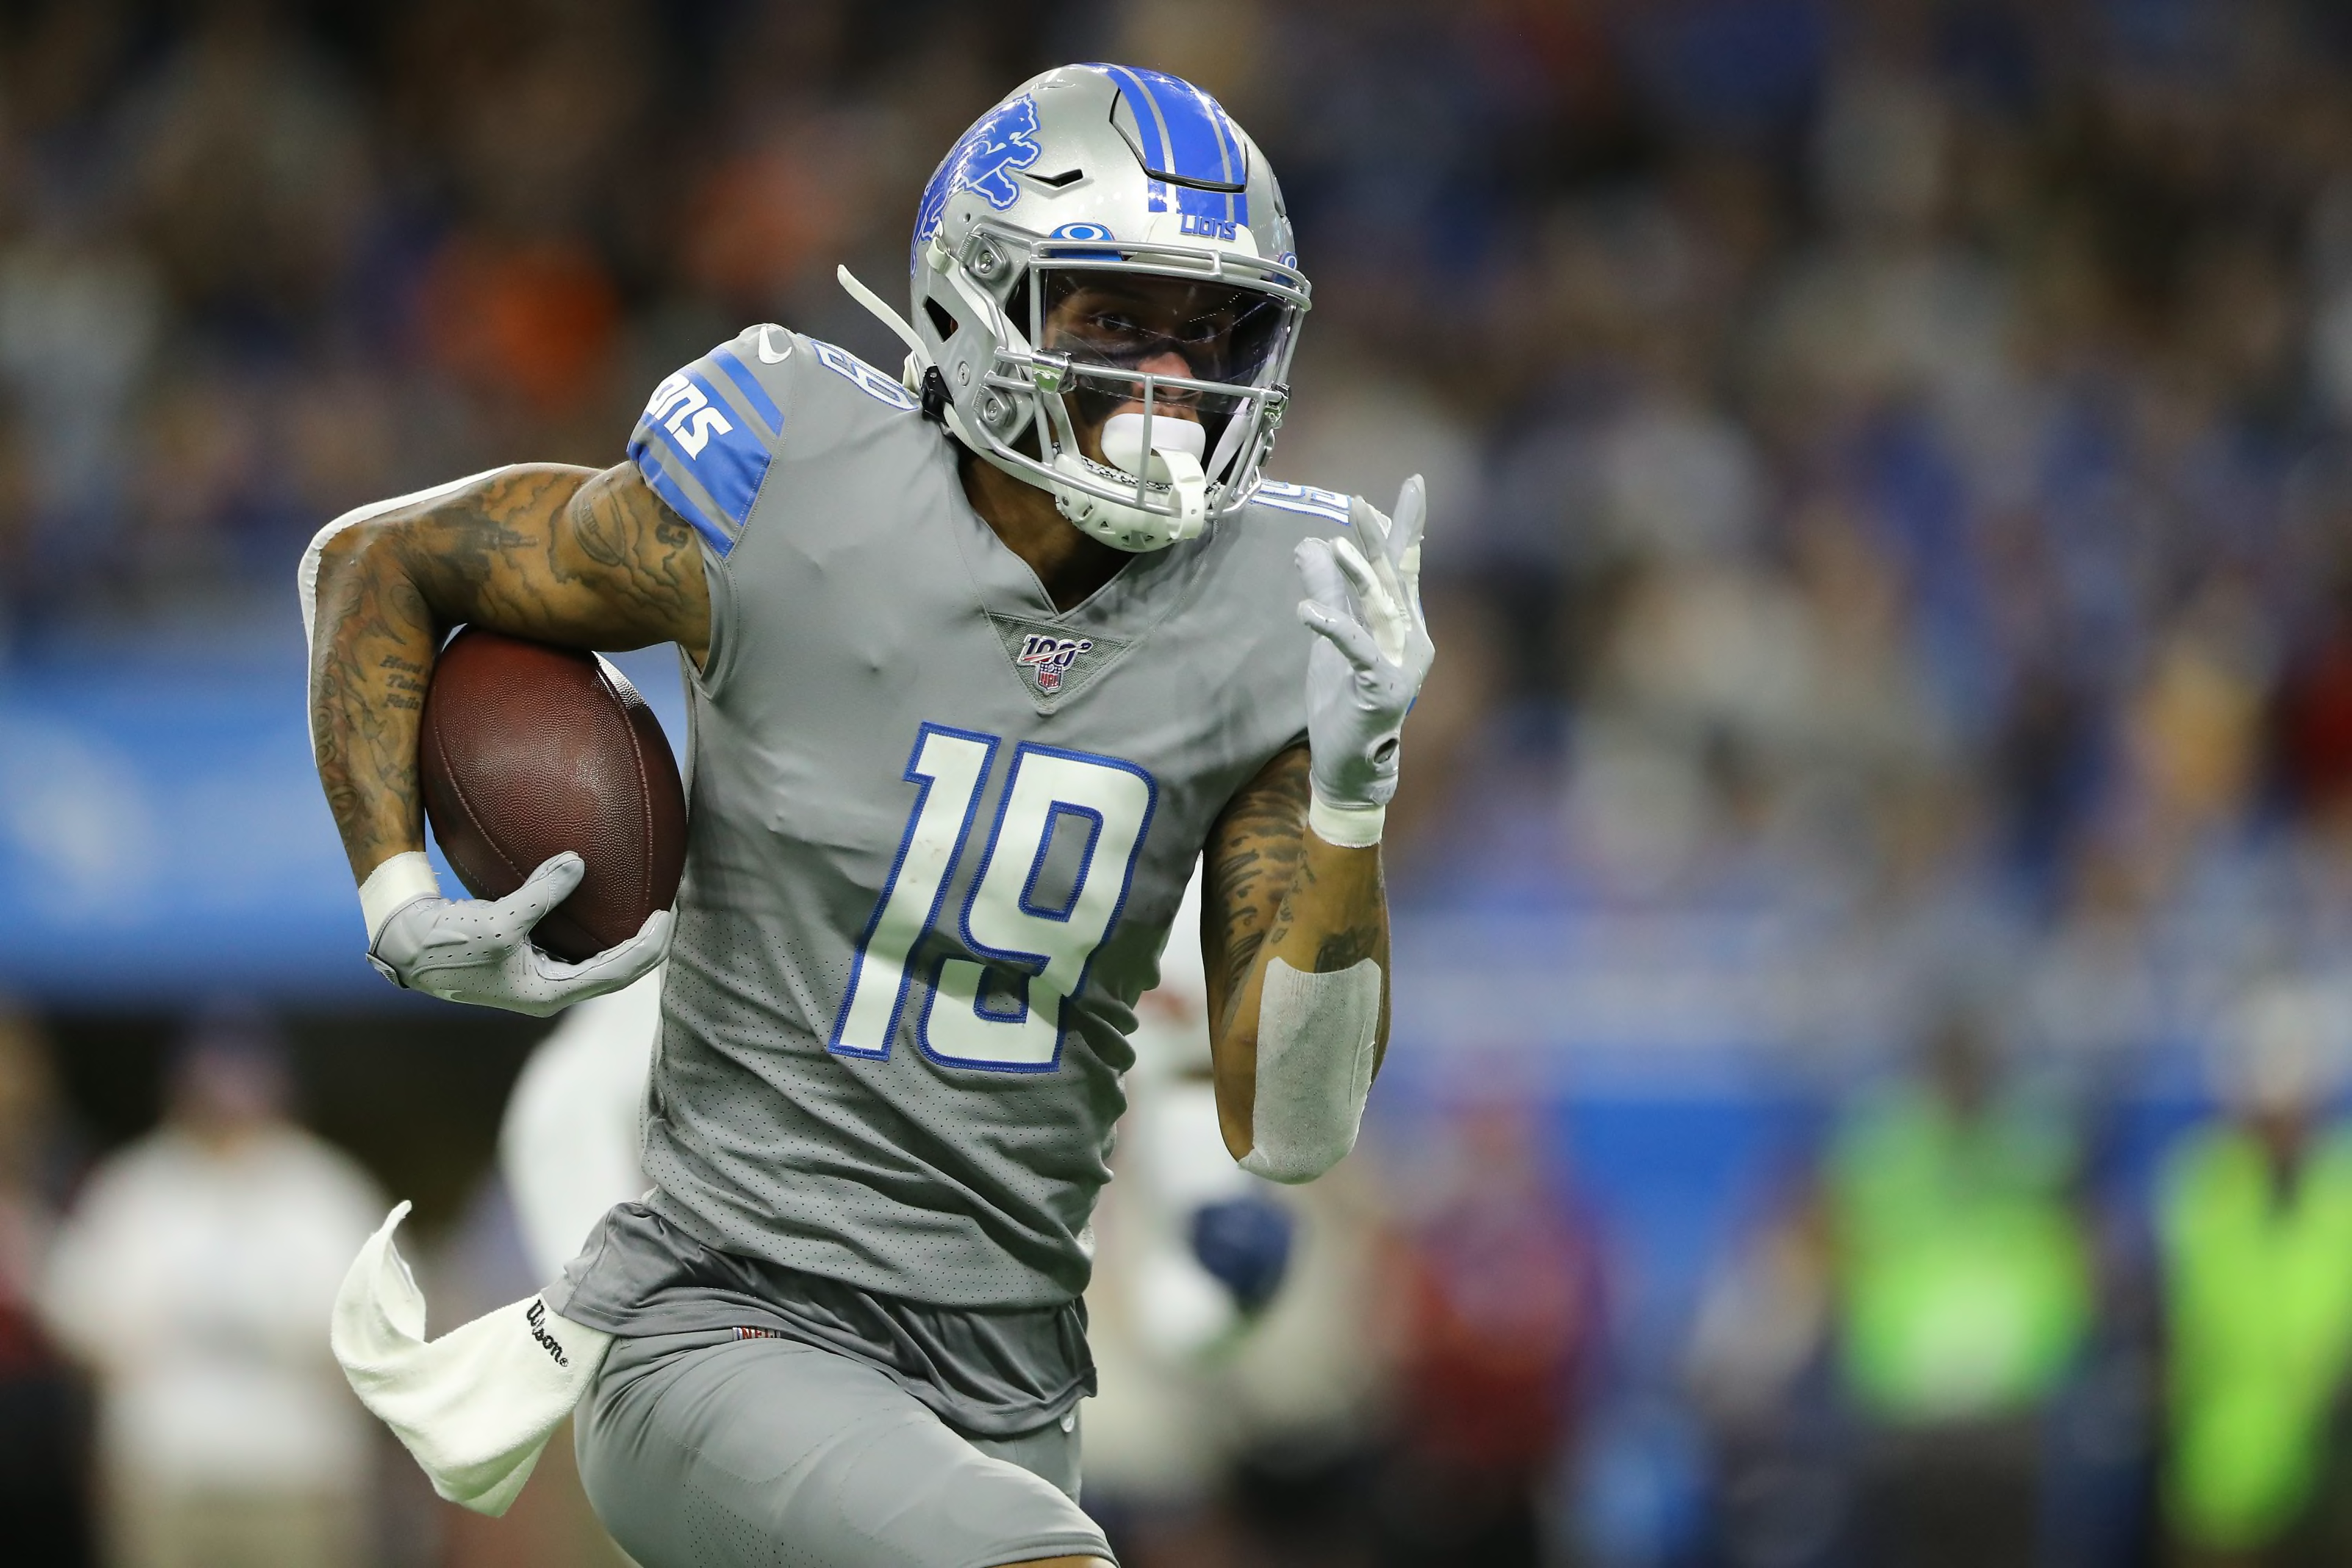 kenny golladay color rush jersey